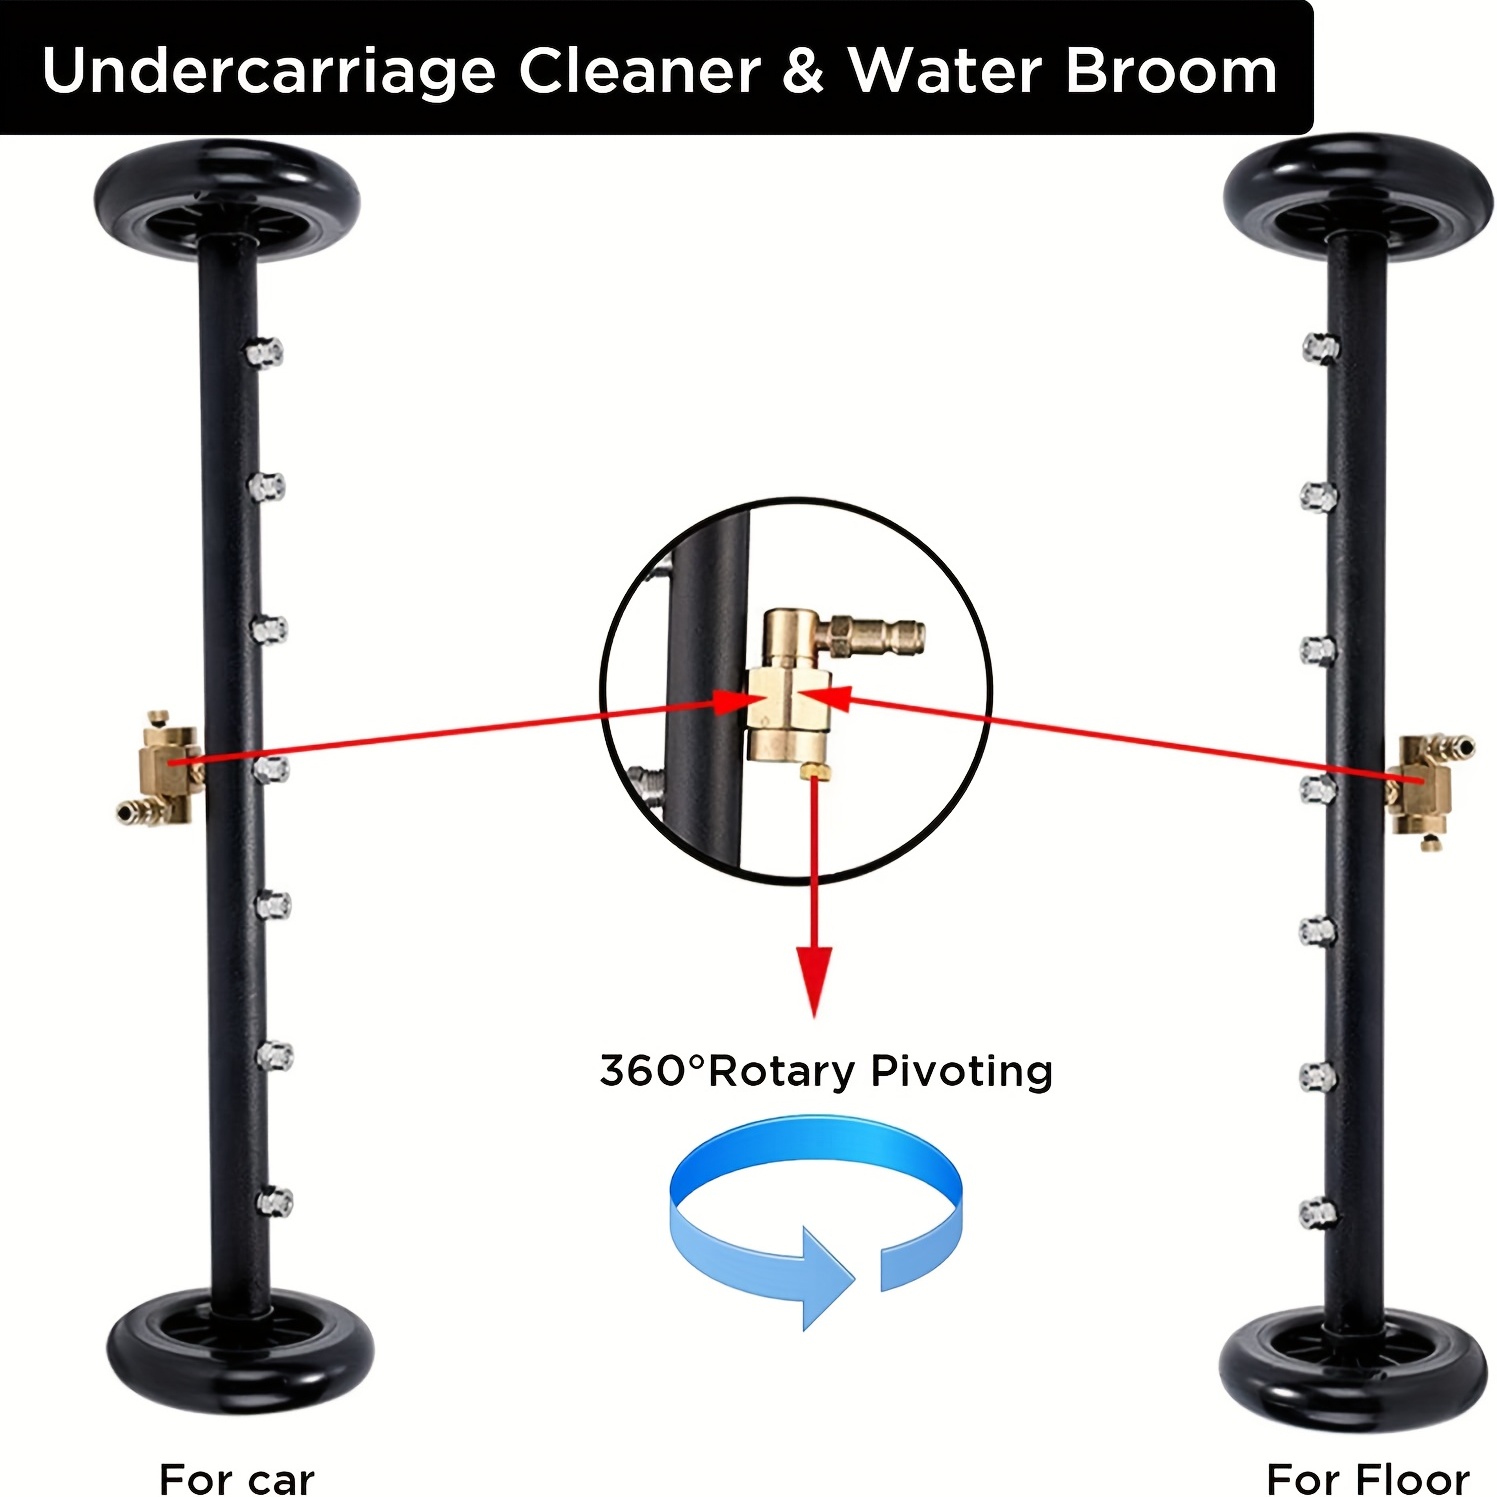 Pressure Washer Undercarriage Cleaner Under Car Washing Water Brooms with 2 Extension Rods ( Curved Rod + Straight Rod) for Car Bottom, Size: 37.5 cm